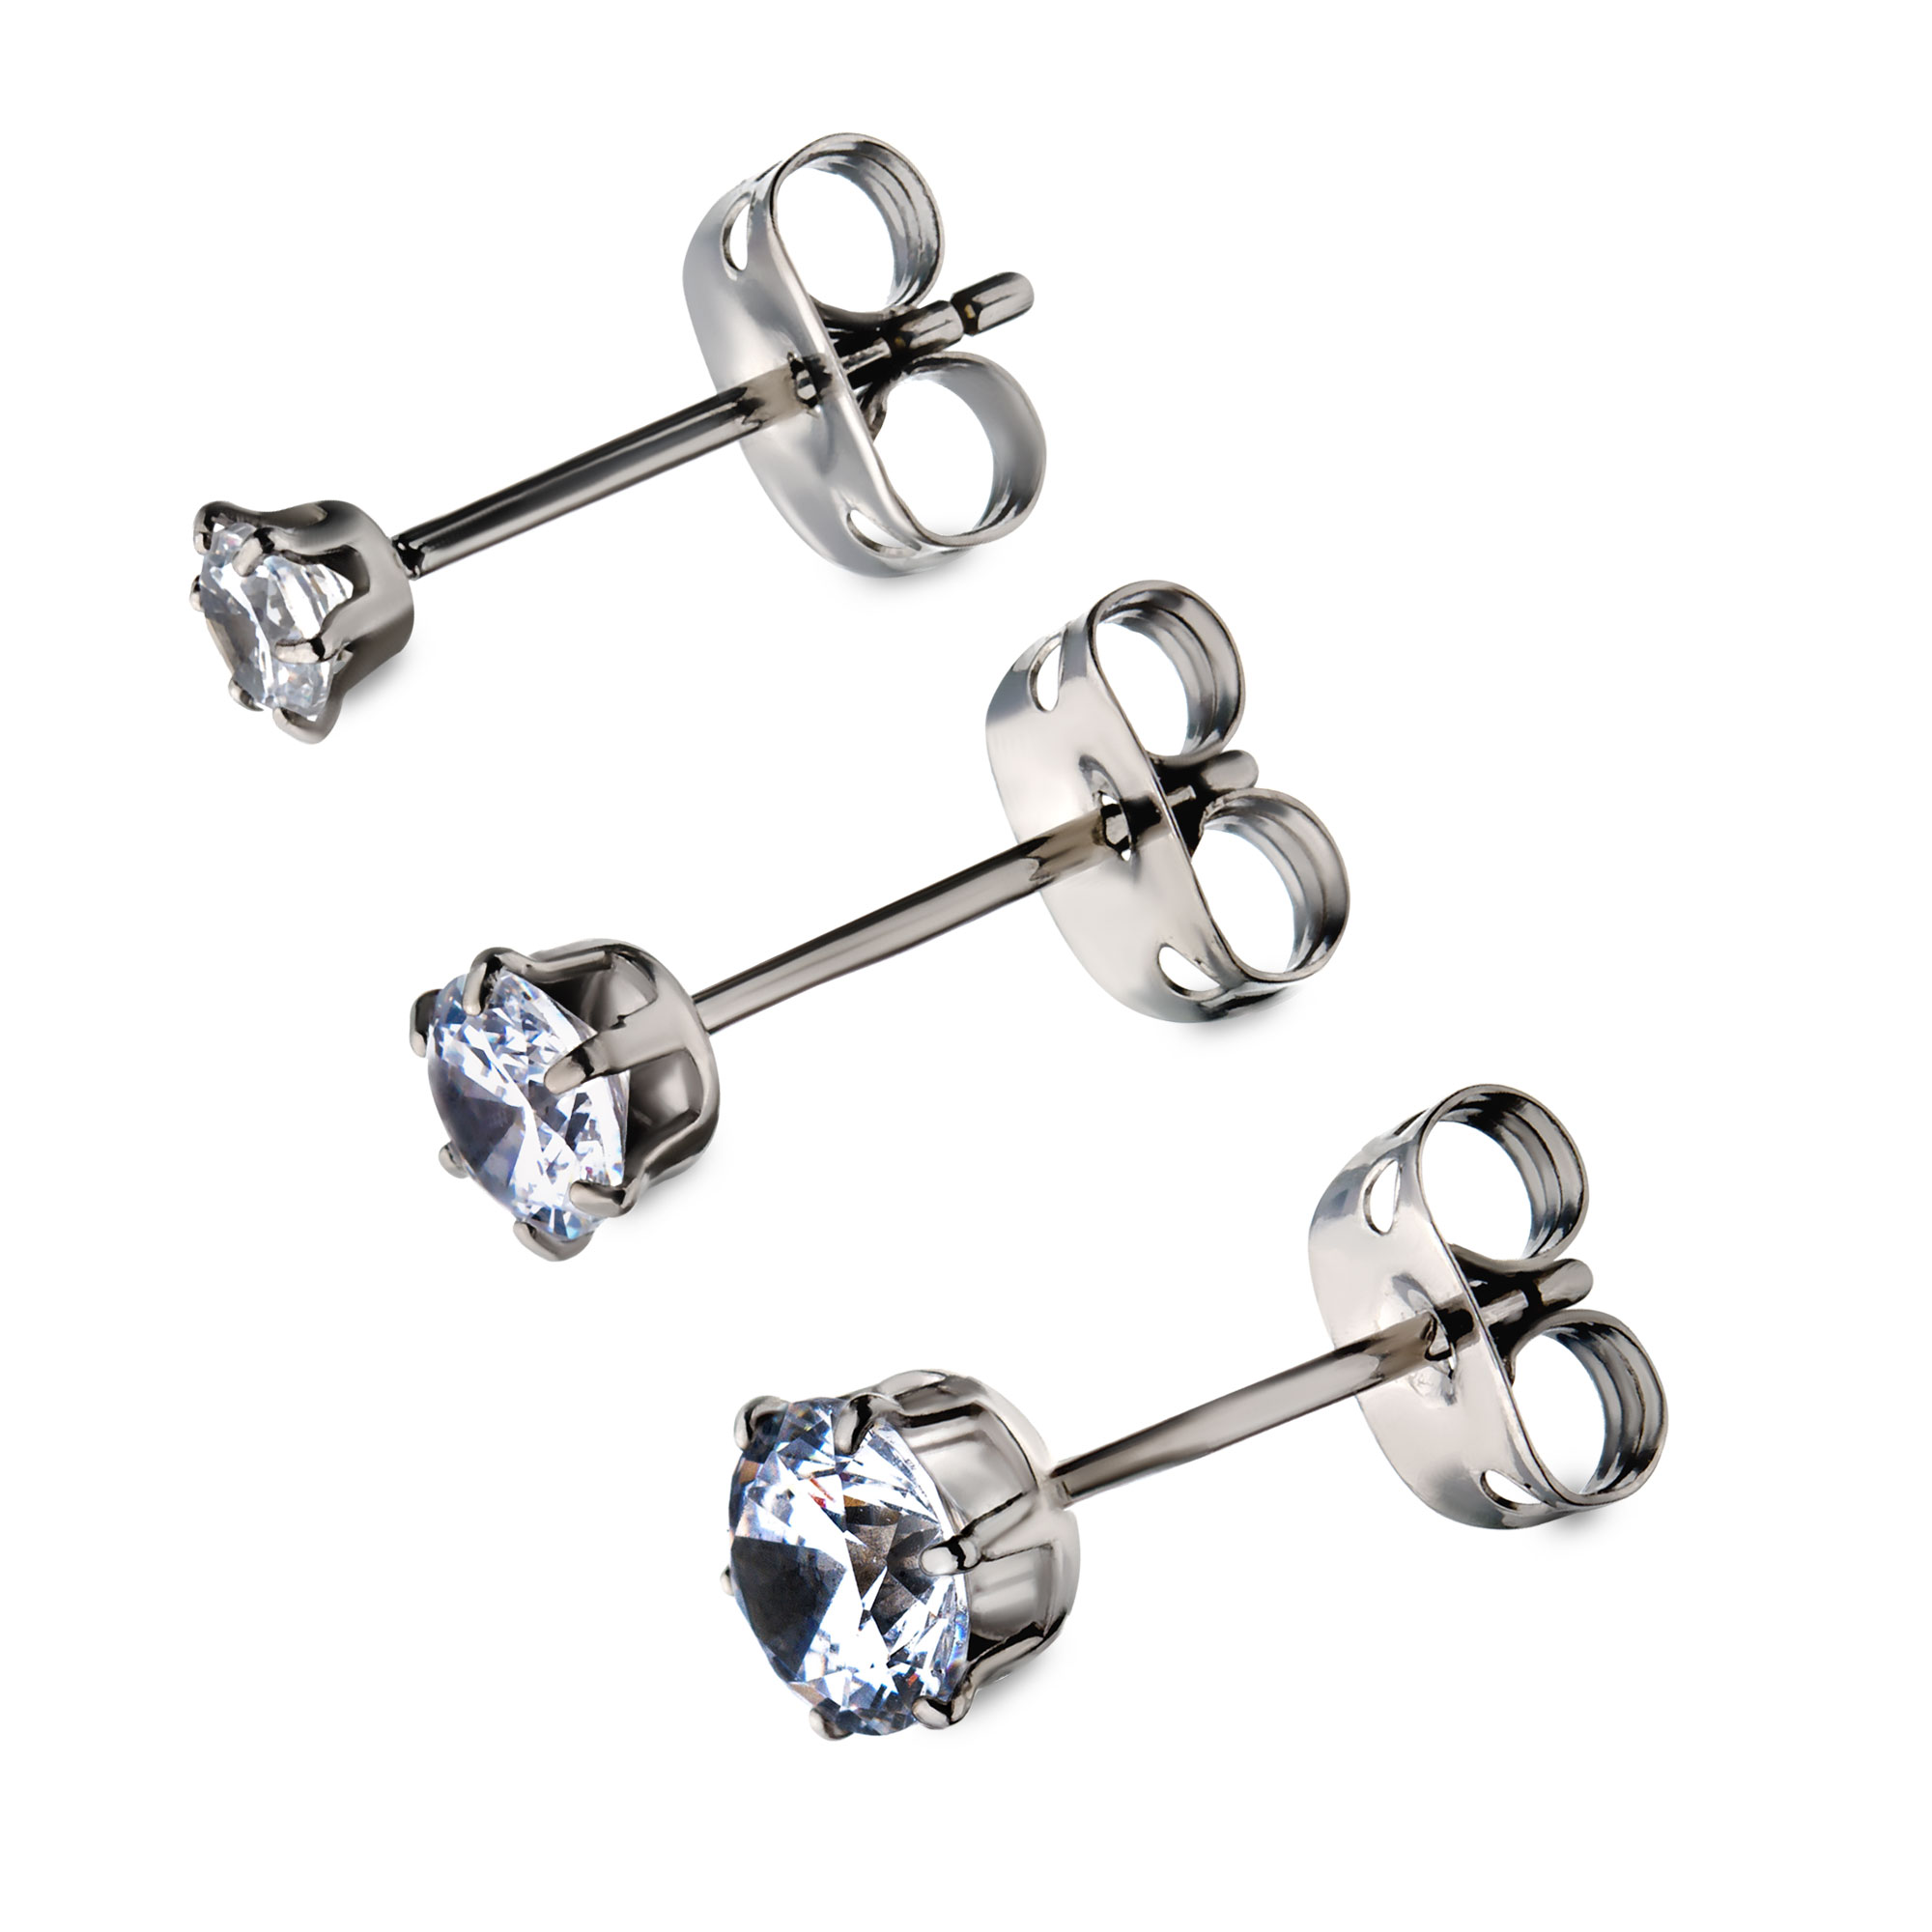 20g Titanium Post and Butterfly Back with Prong Set CZ Stud Earrings Image 2 Carroll / Ochs Jewelers Monroe, MI